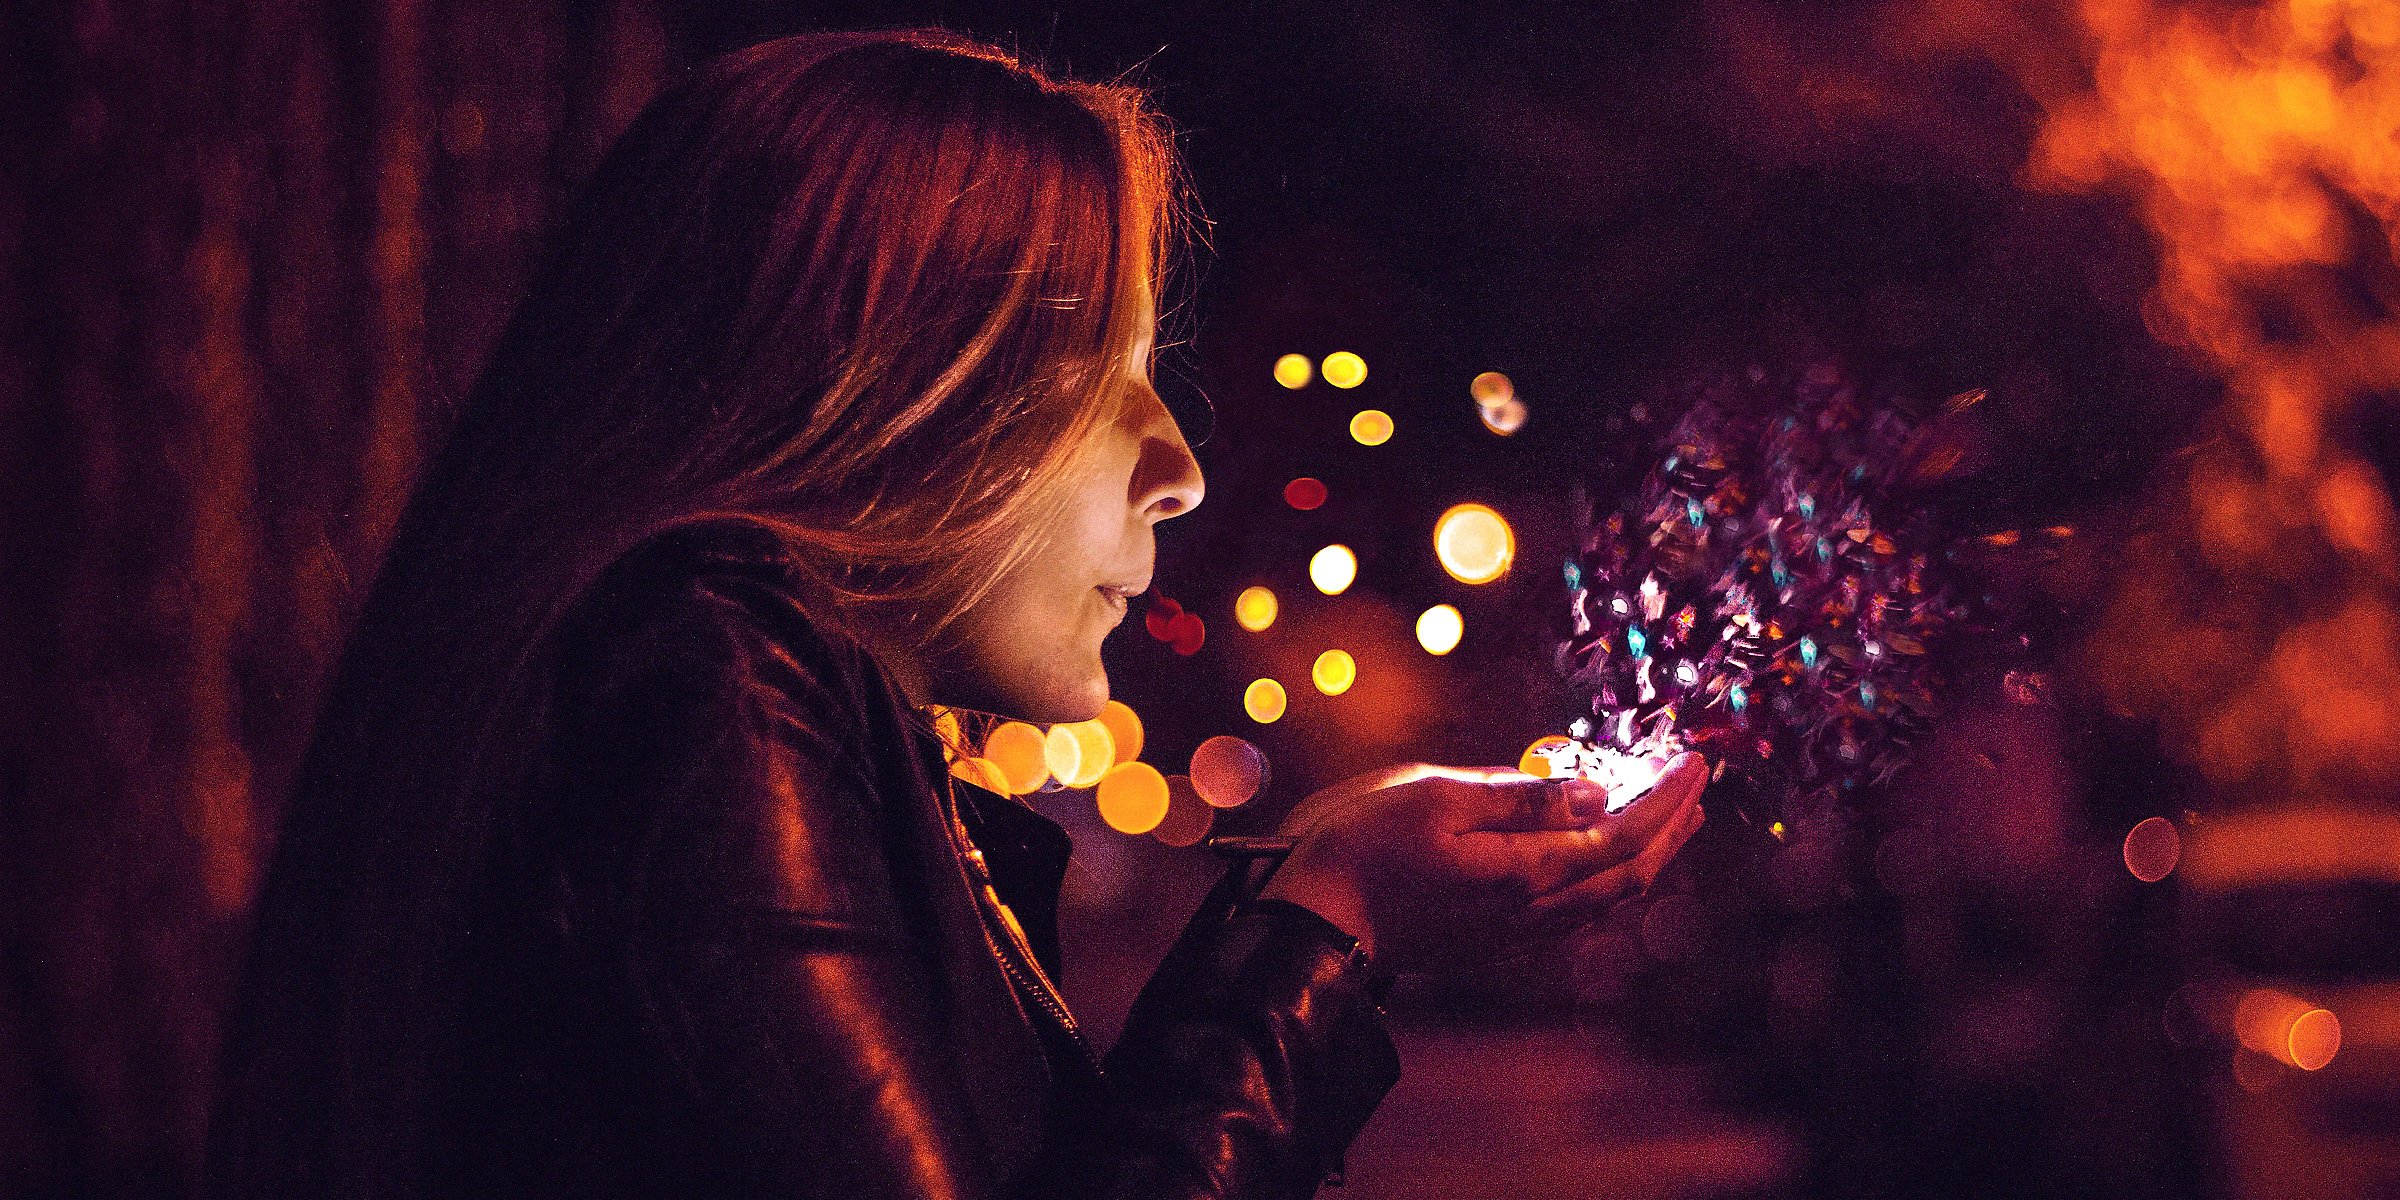 A woman blowing magic out of her hands  | Source: Unsplash